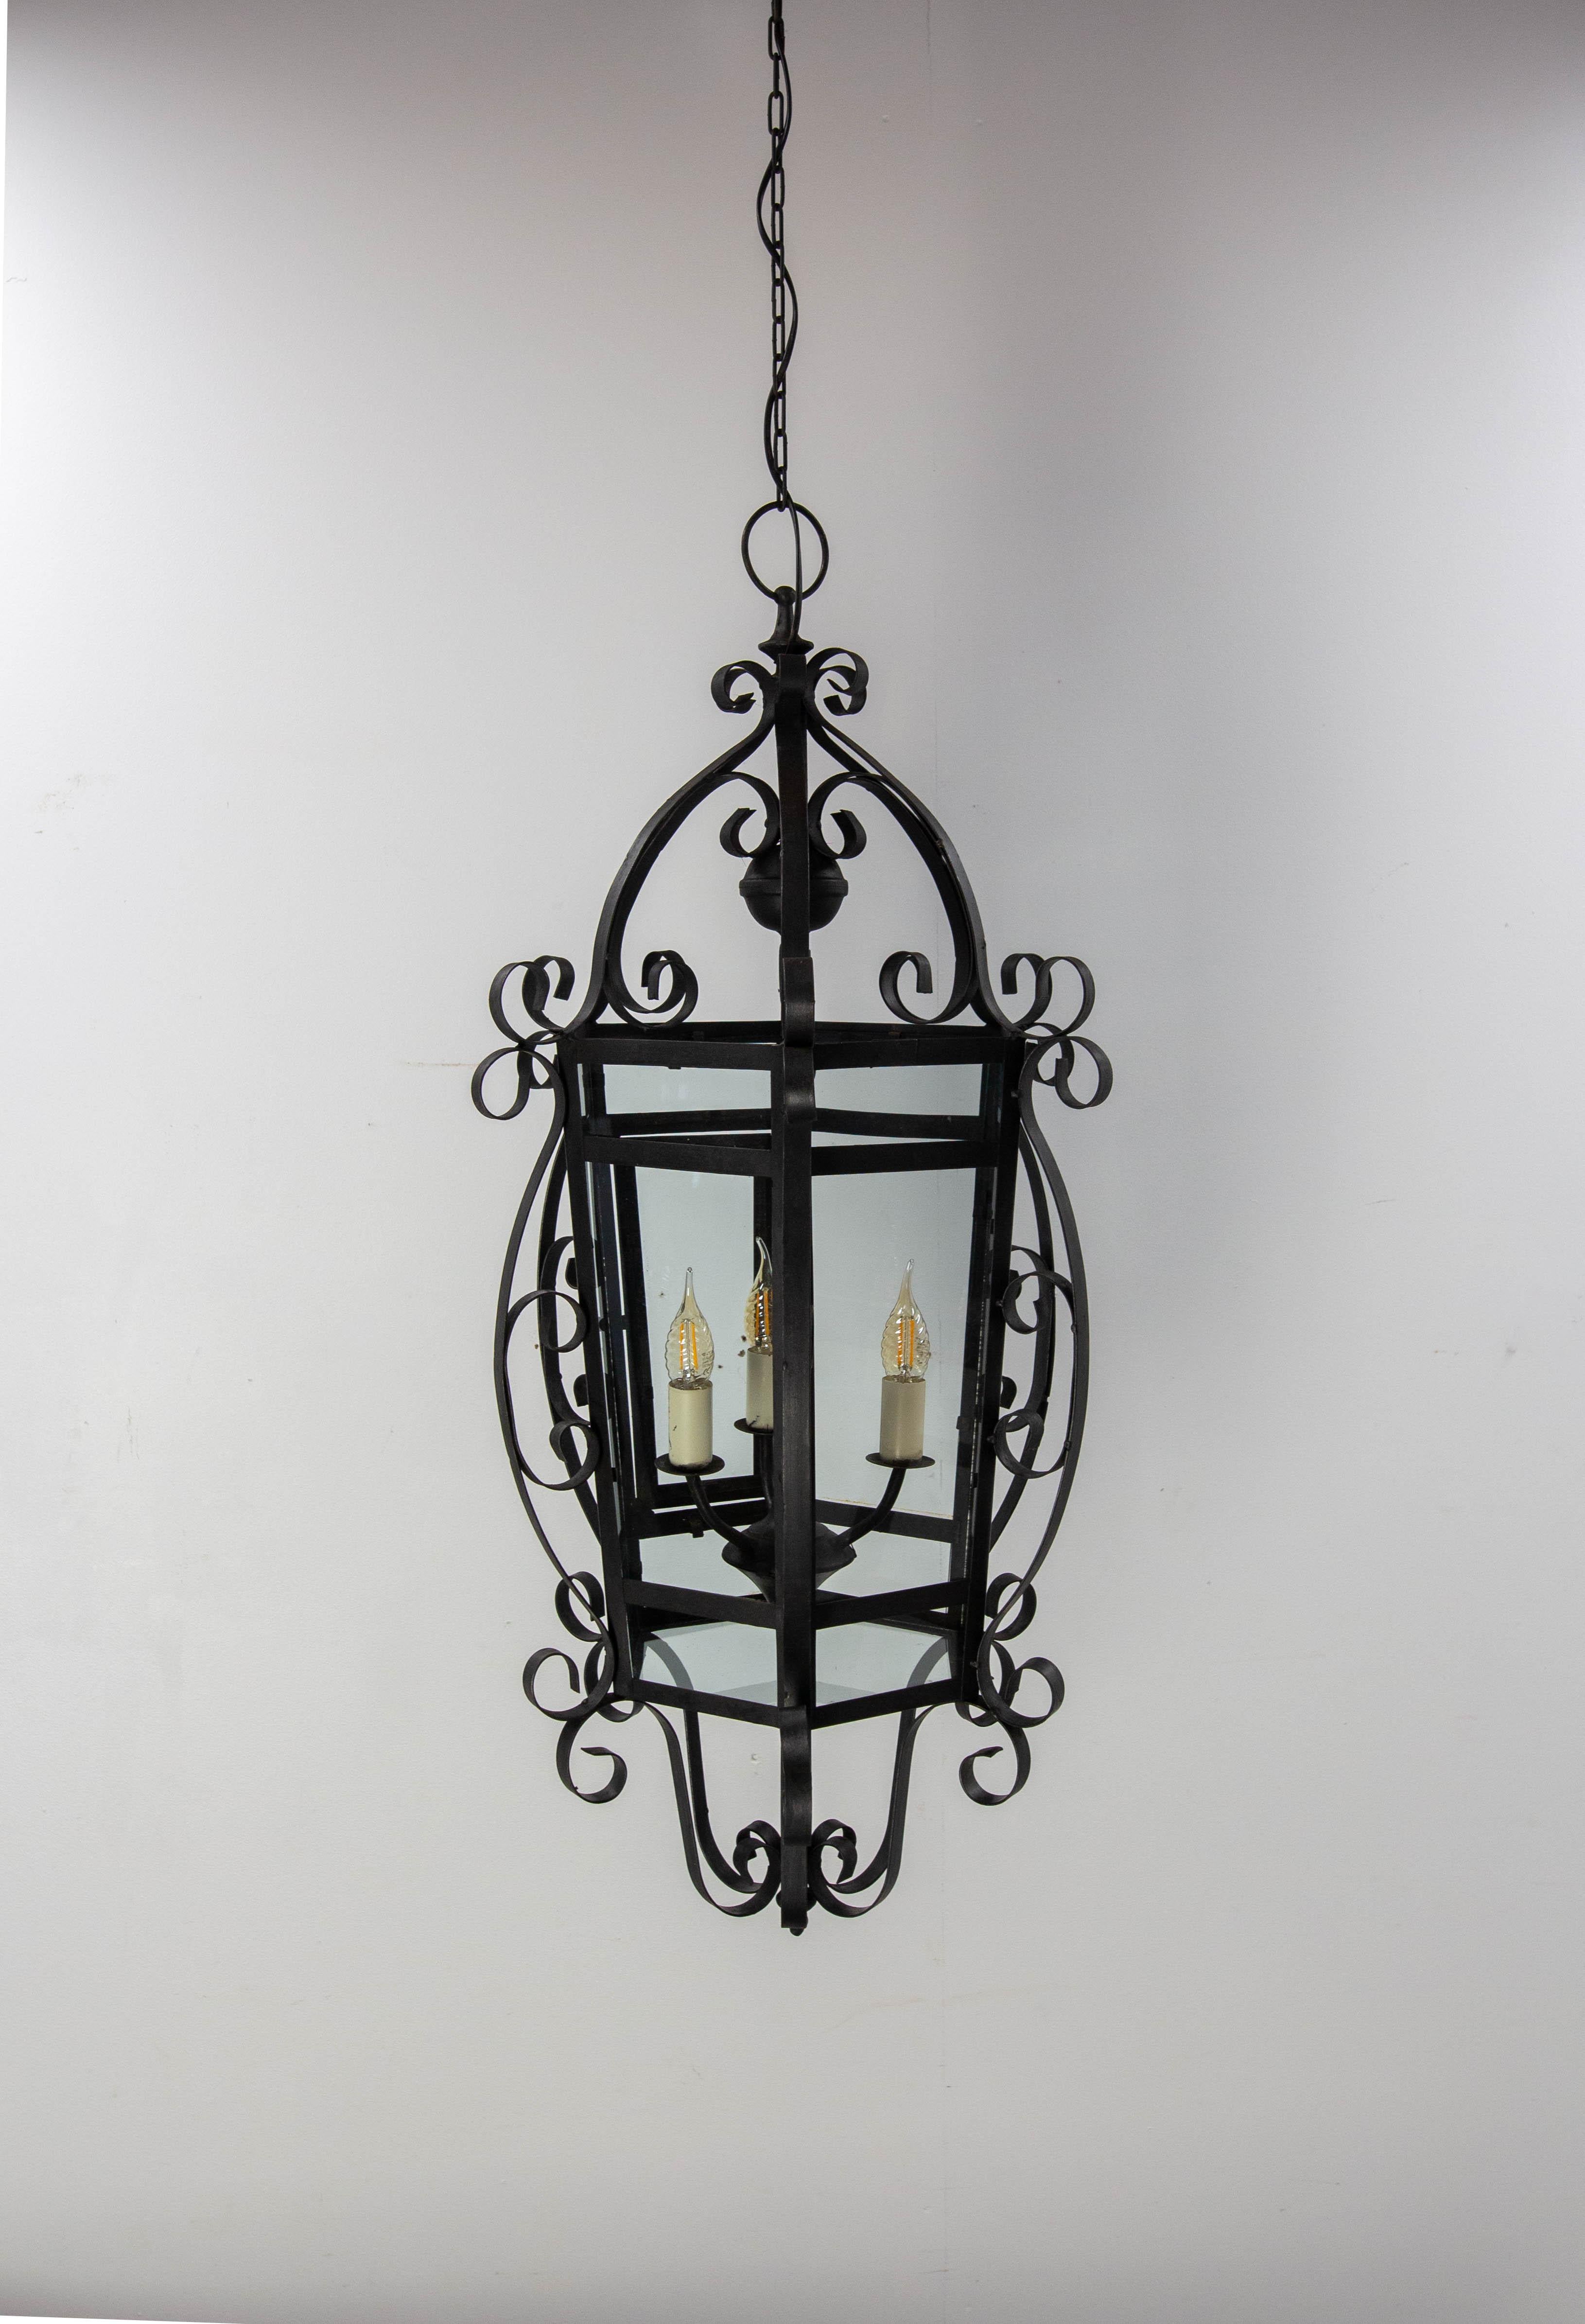 Ceiling pendant, France.
Lustre made in wrought iron and glass.The glass is the original but it is like new.
Soft and pleasant lighting.
Its large size makes it ideal lighting and decoration for a large room or patio
This chandelier is conform to